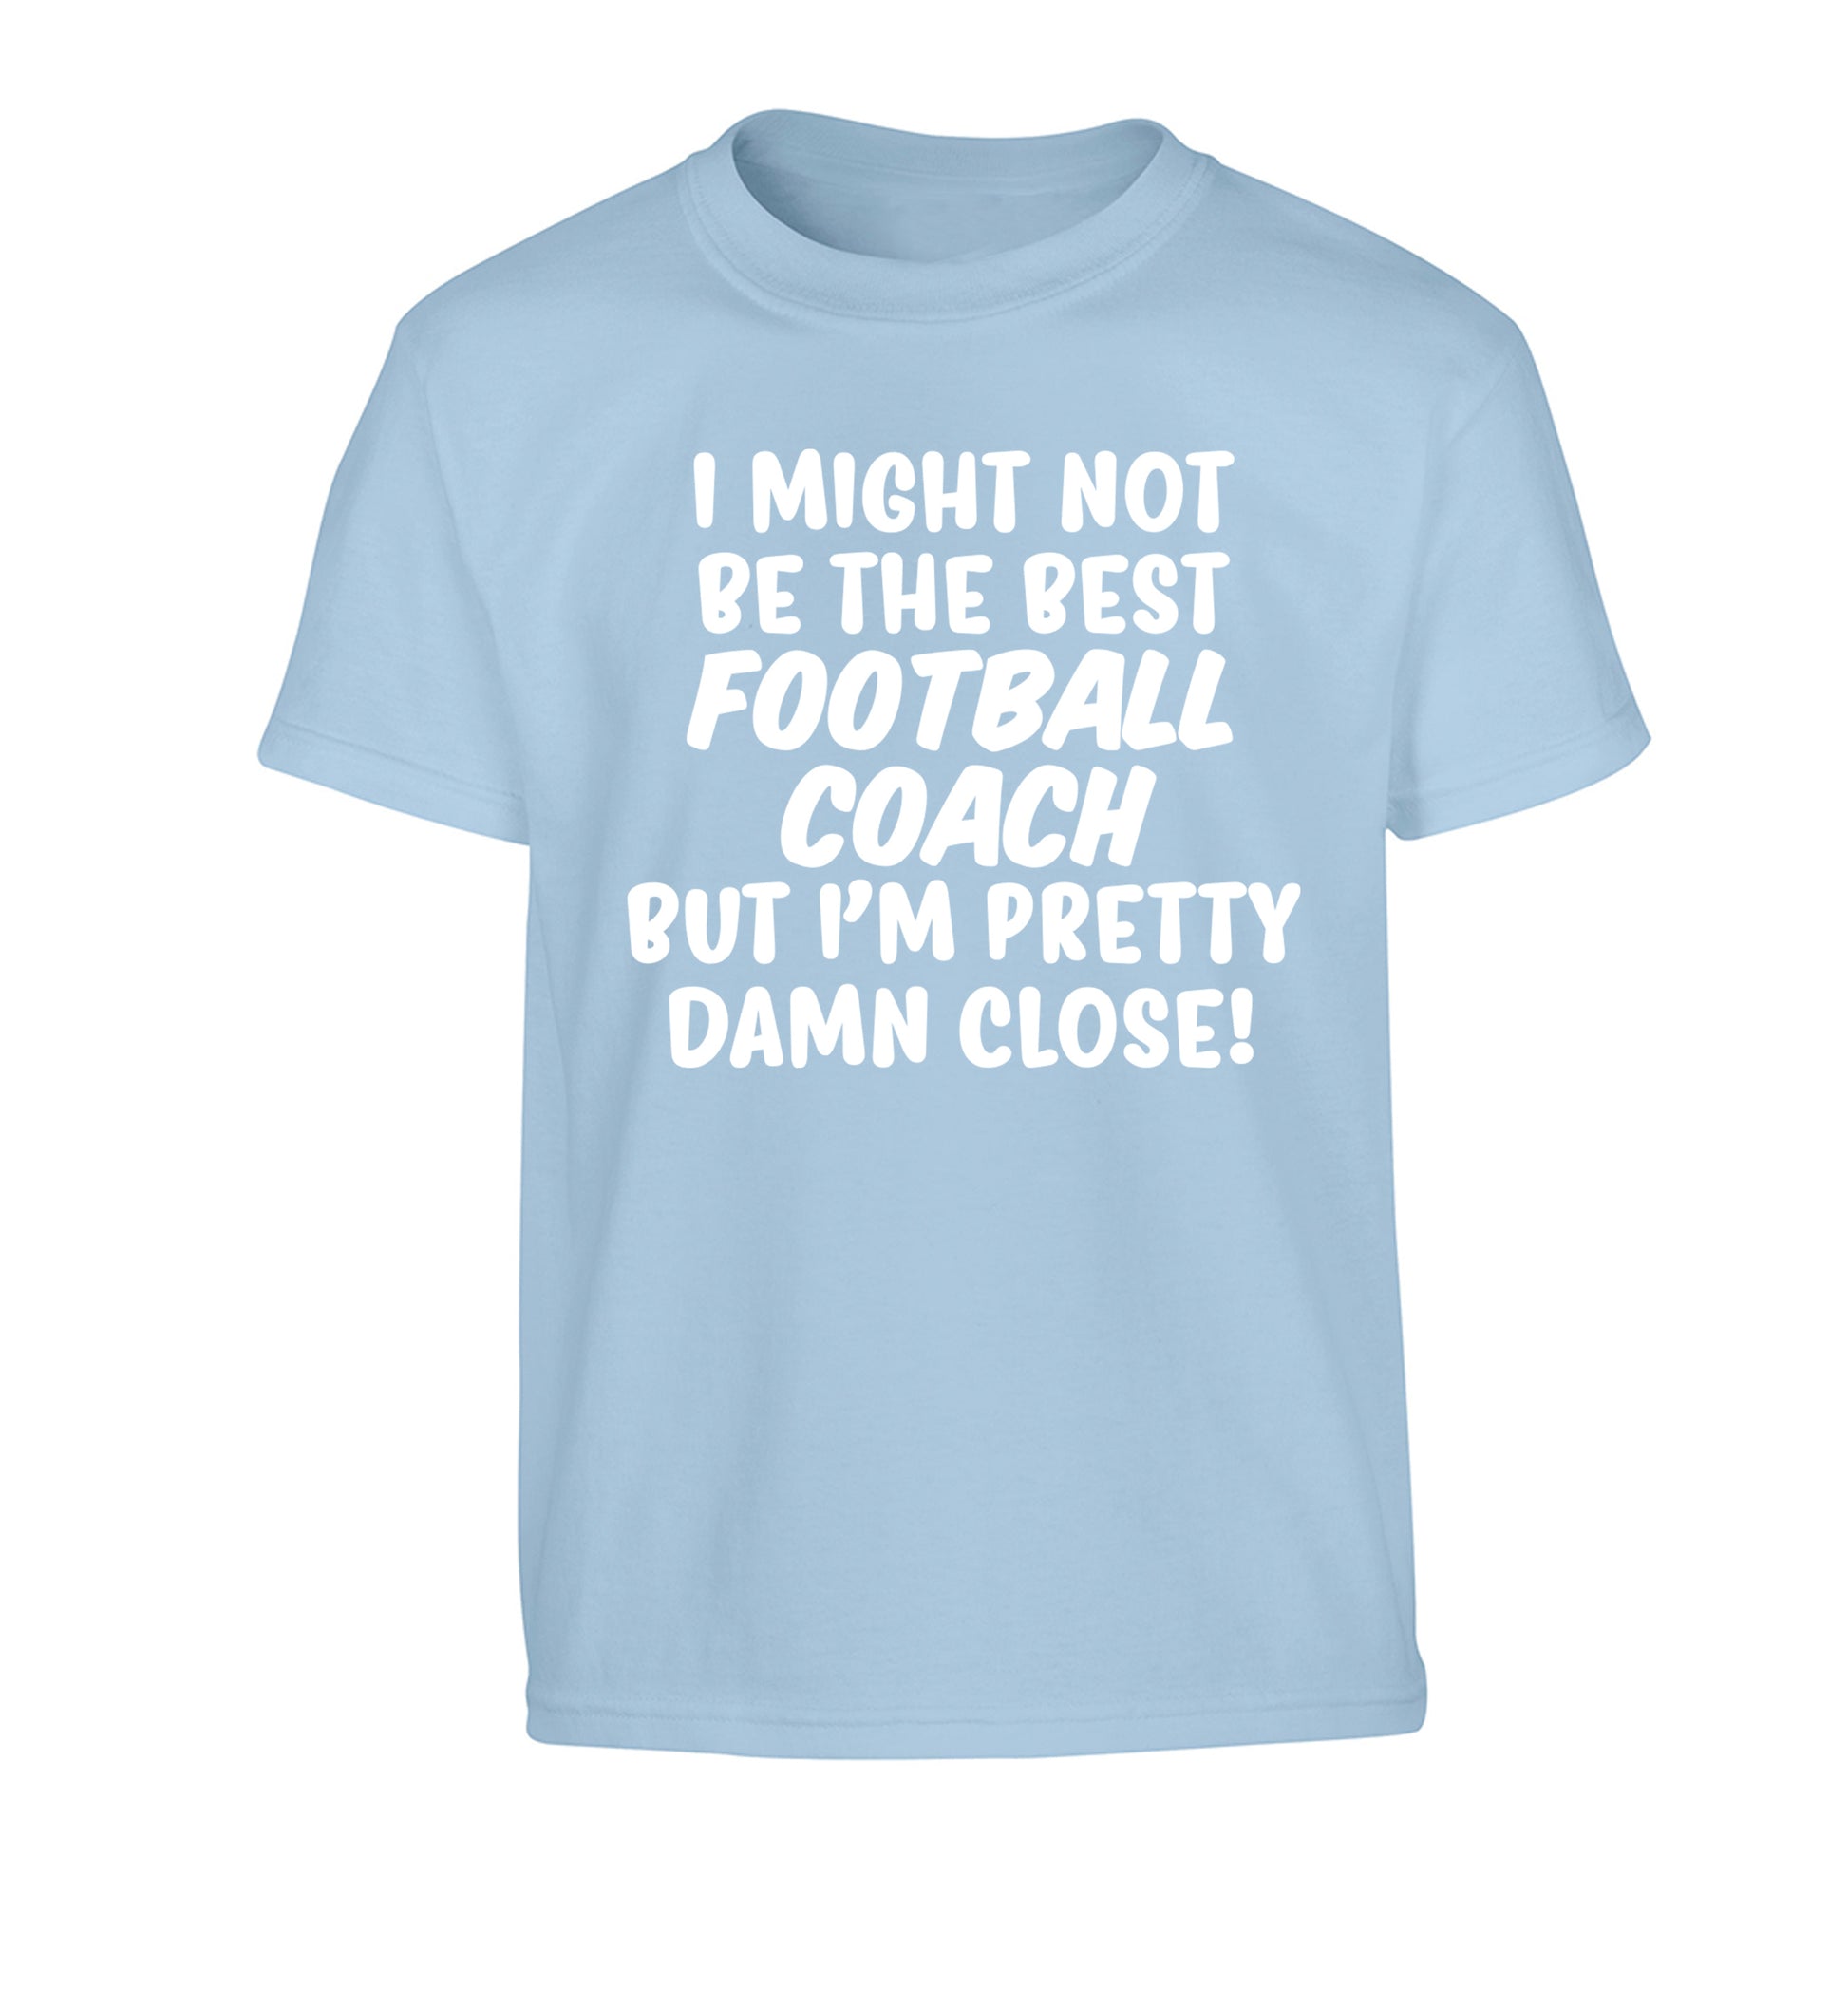 I might not be the best football coach but I'm pretty close! Children's light blue Tshirt 12-14 Years